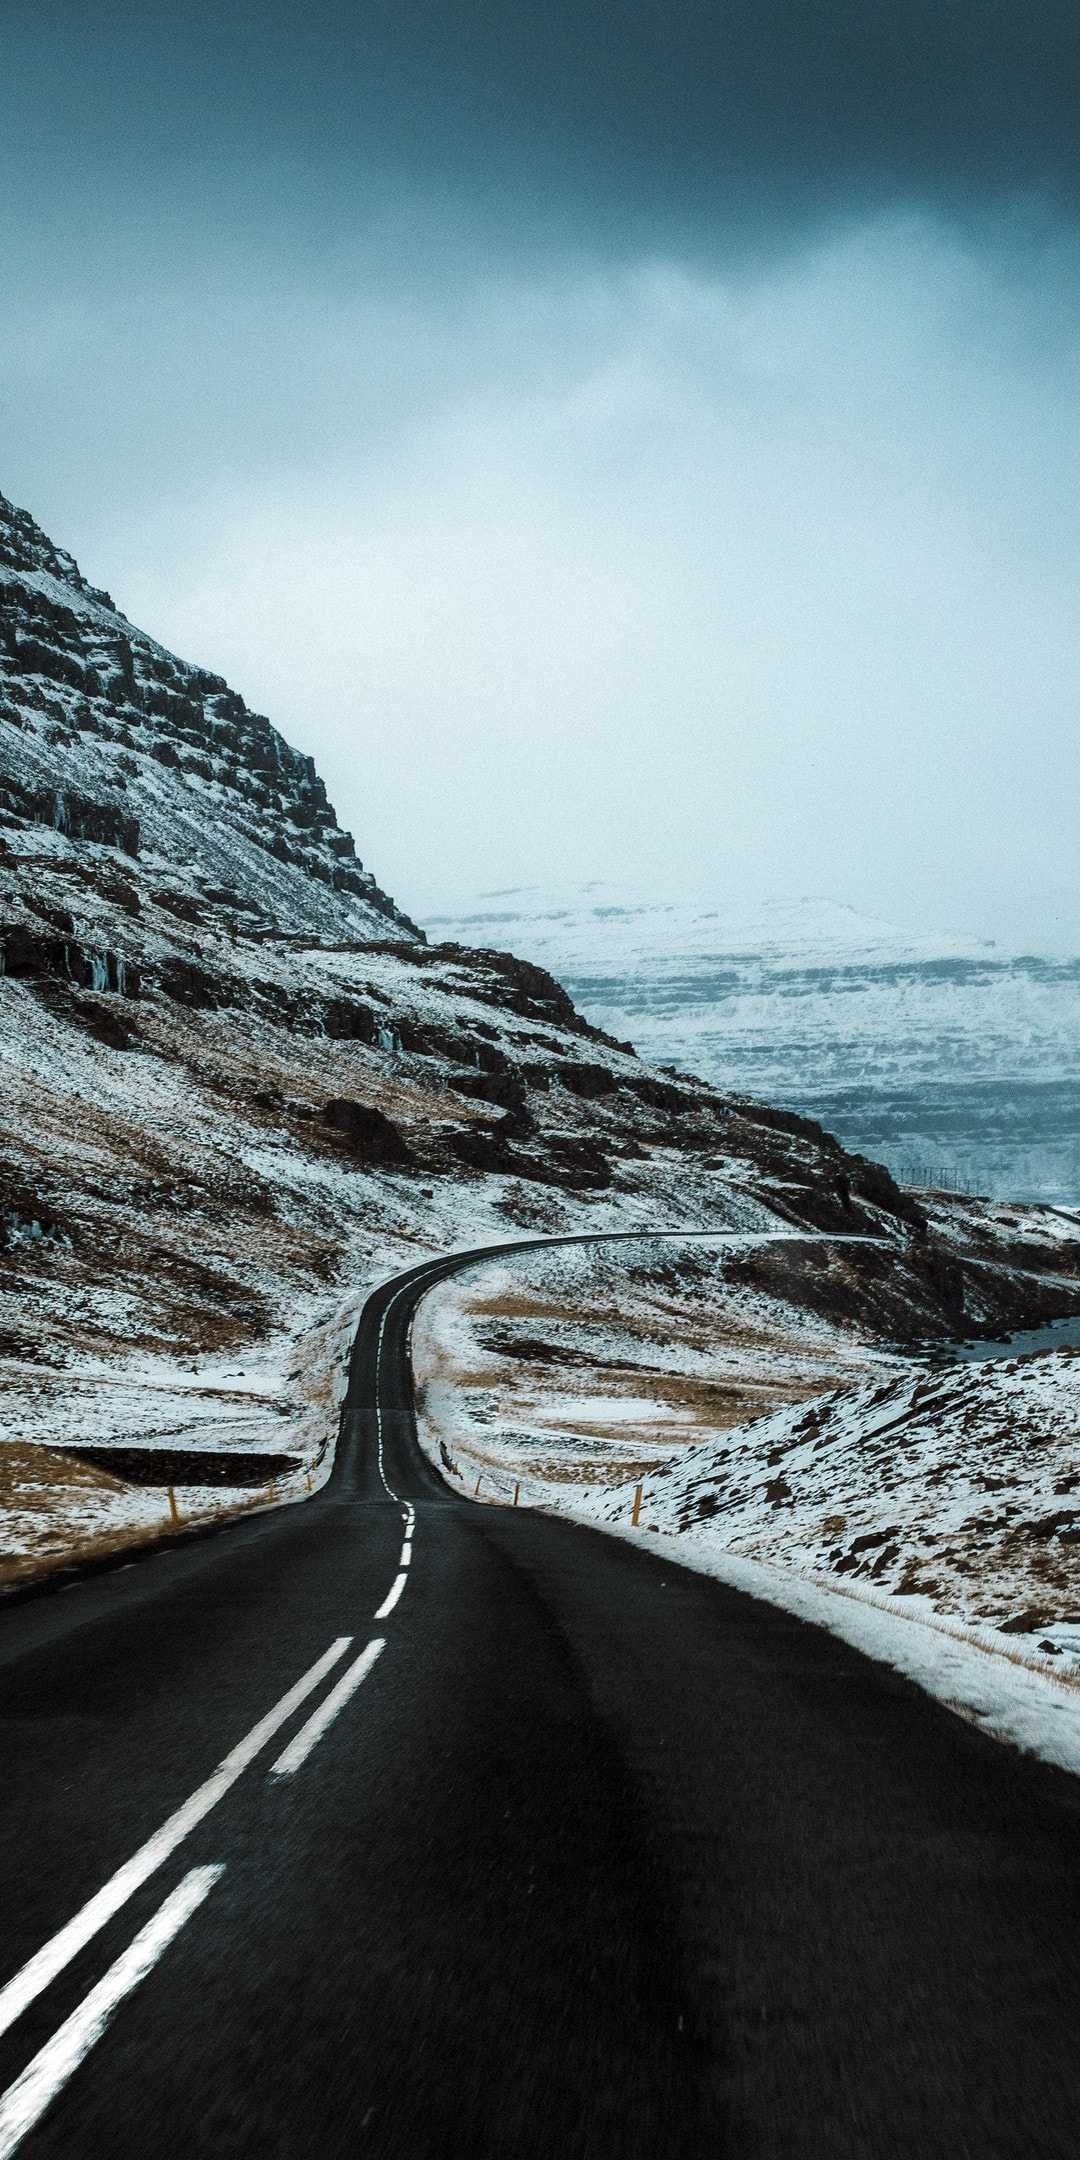 Iceland Iphone Wallpapers